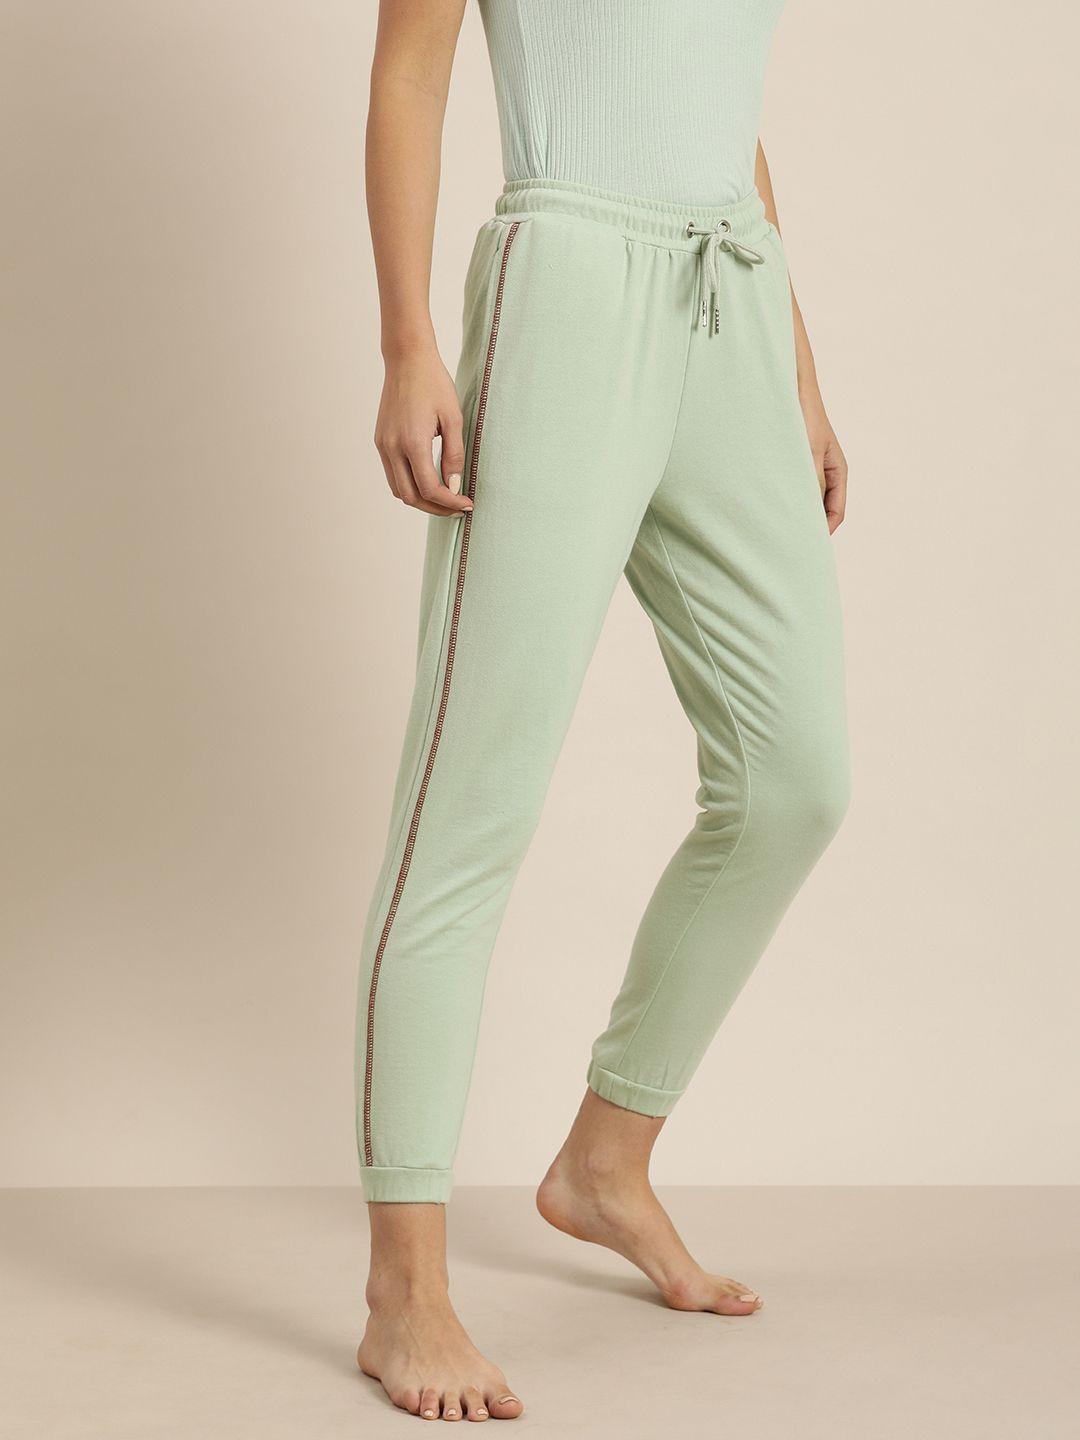 ether-women-mint-green-solid-lounge-pants